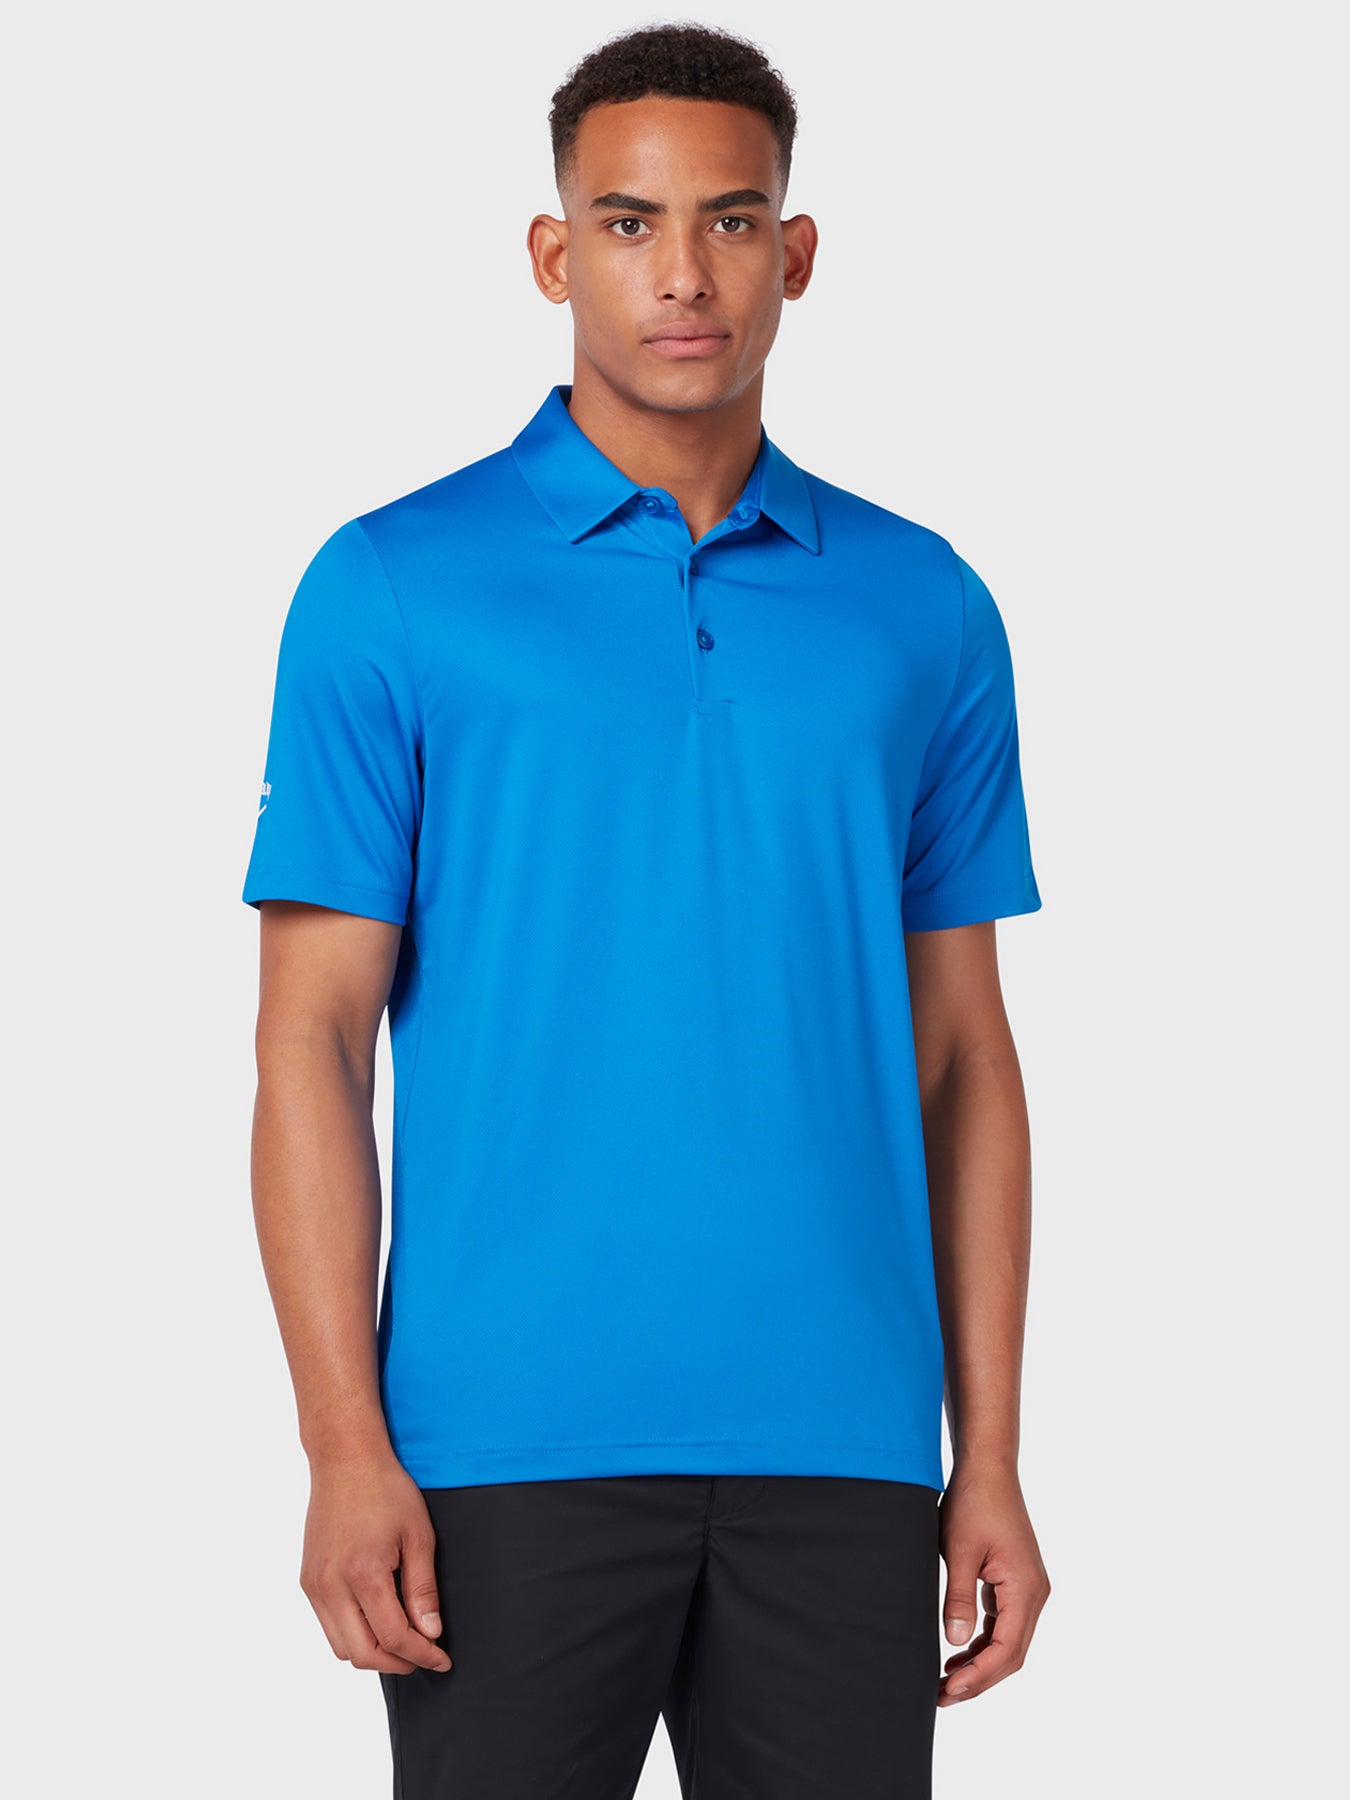 View Swing Tech Tour Polo In Magnetic Blue Magnetic Blue 4XL information